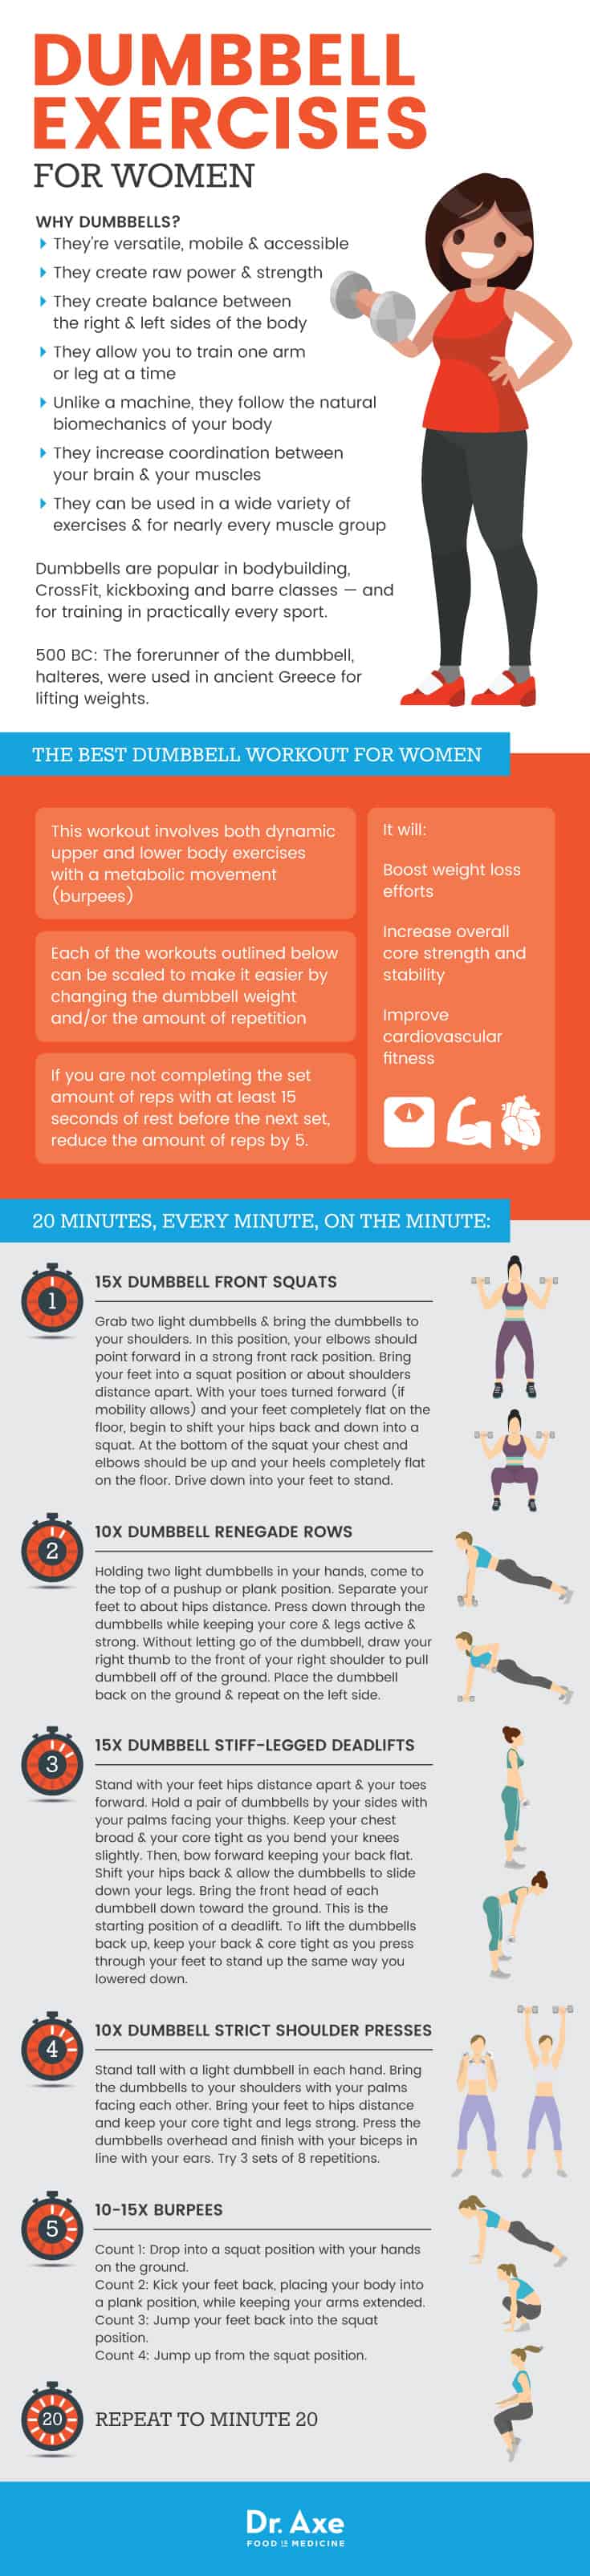 Dumbbell workout for women - Dr. Axe